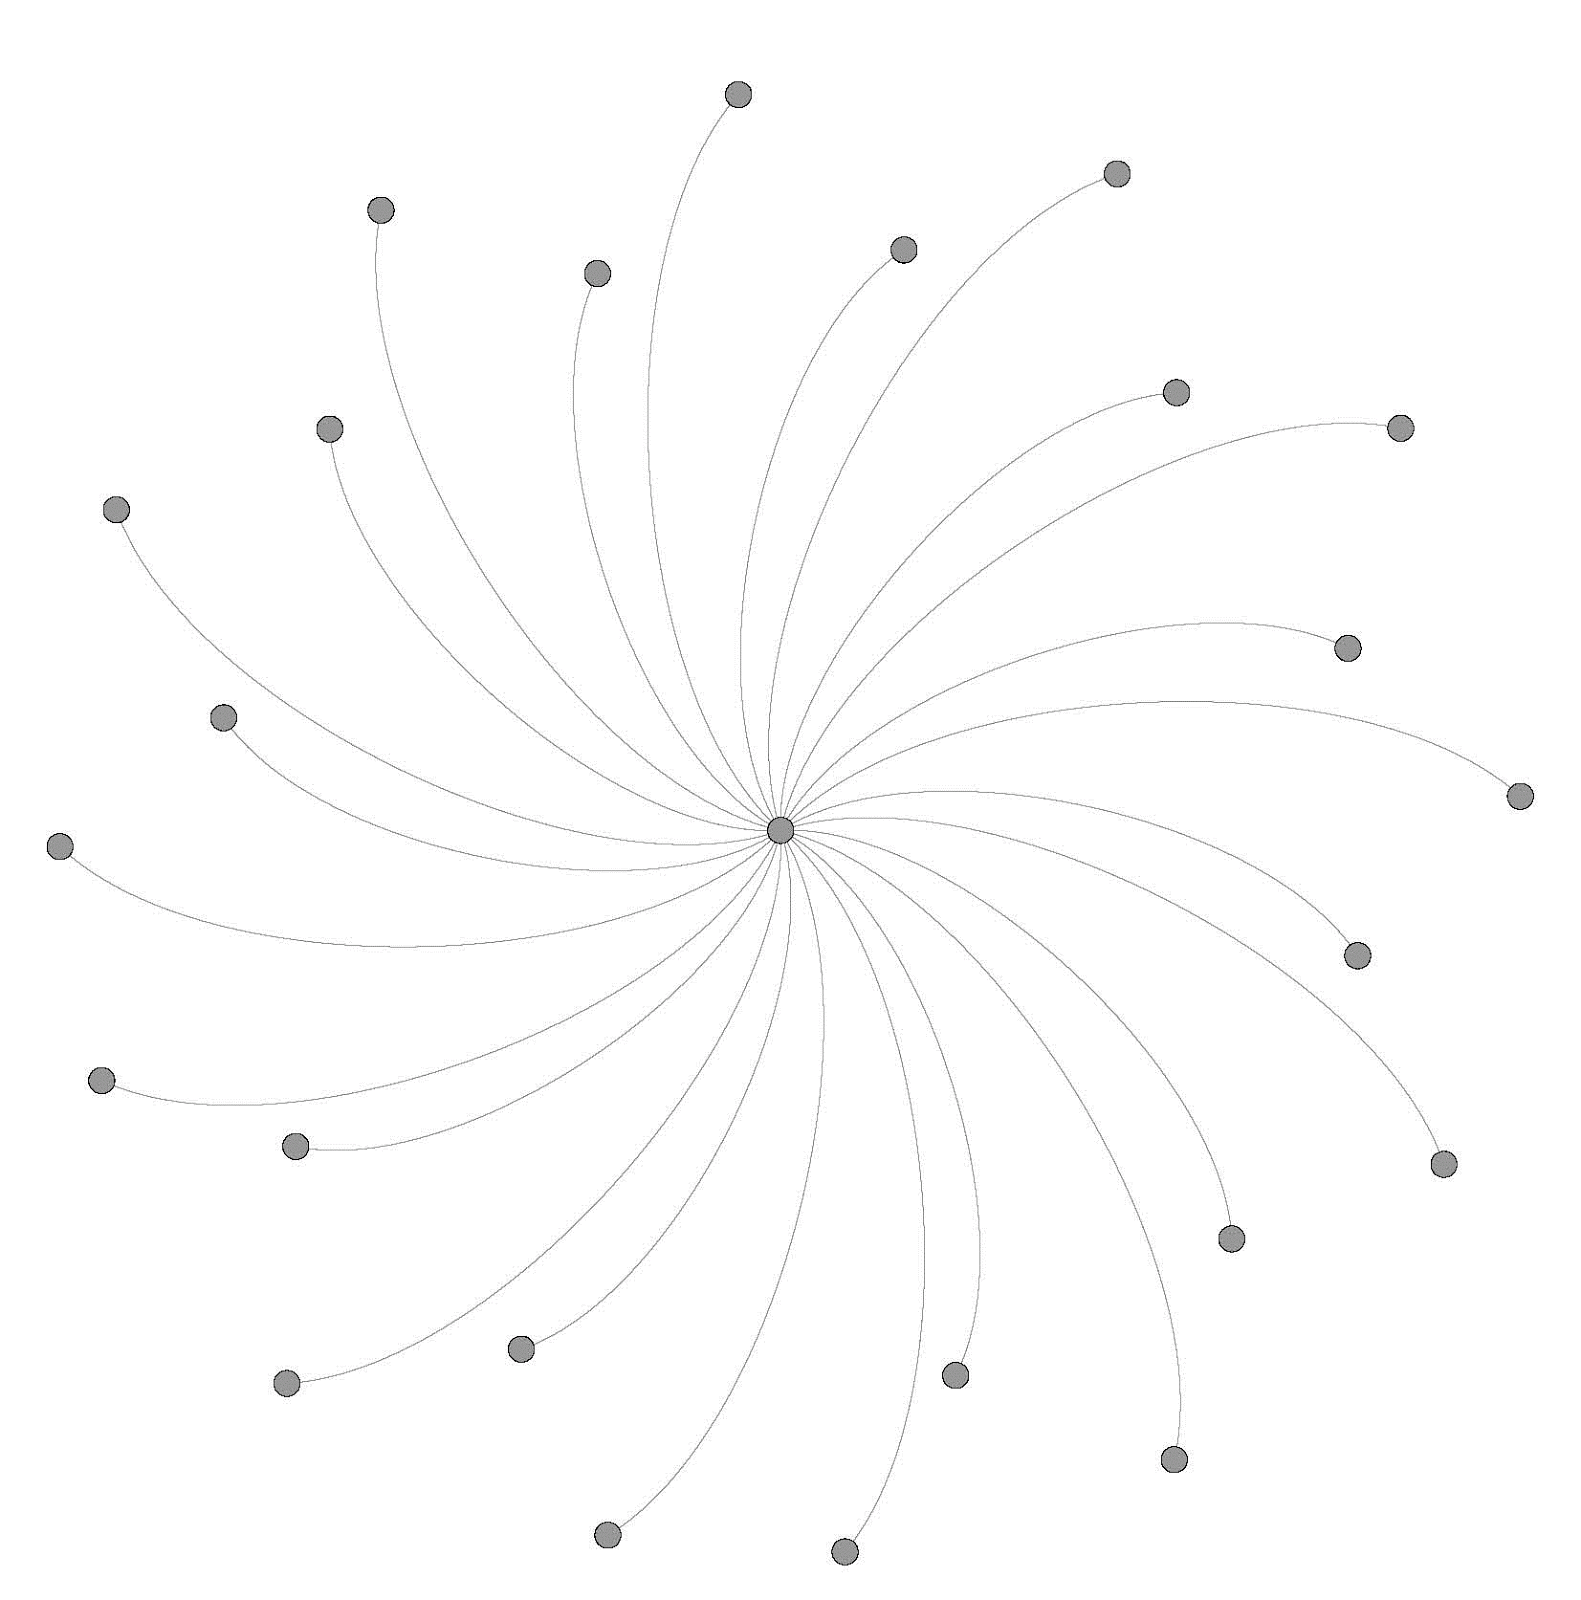 Using Gephi to visualize our Facebook network.